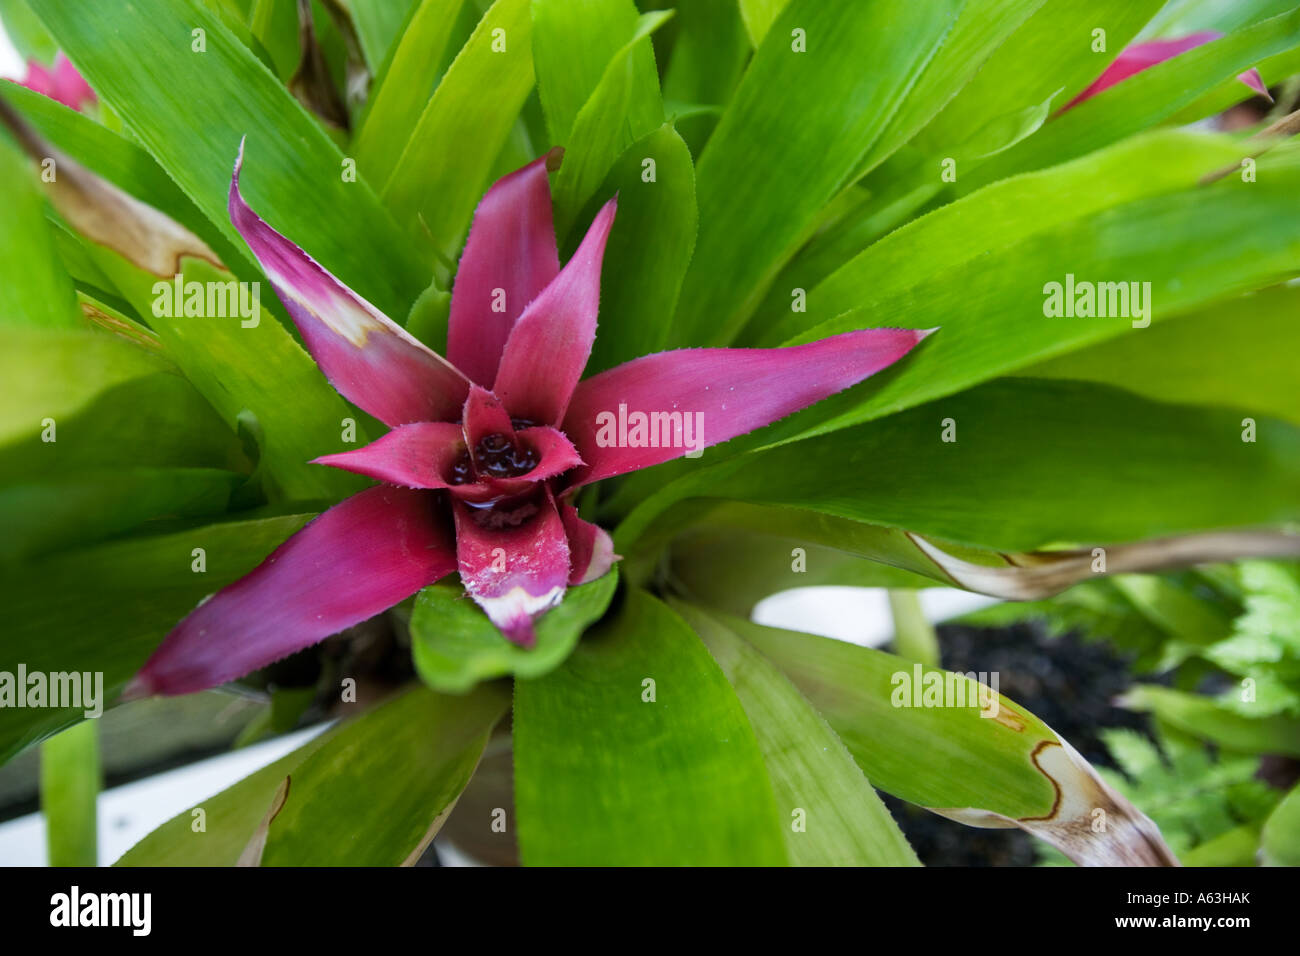 Aechmea fulgens tropical plant with green leaves and pink core flower. Stock Photo